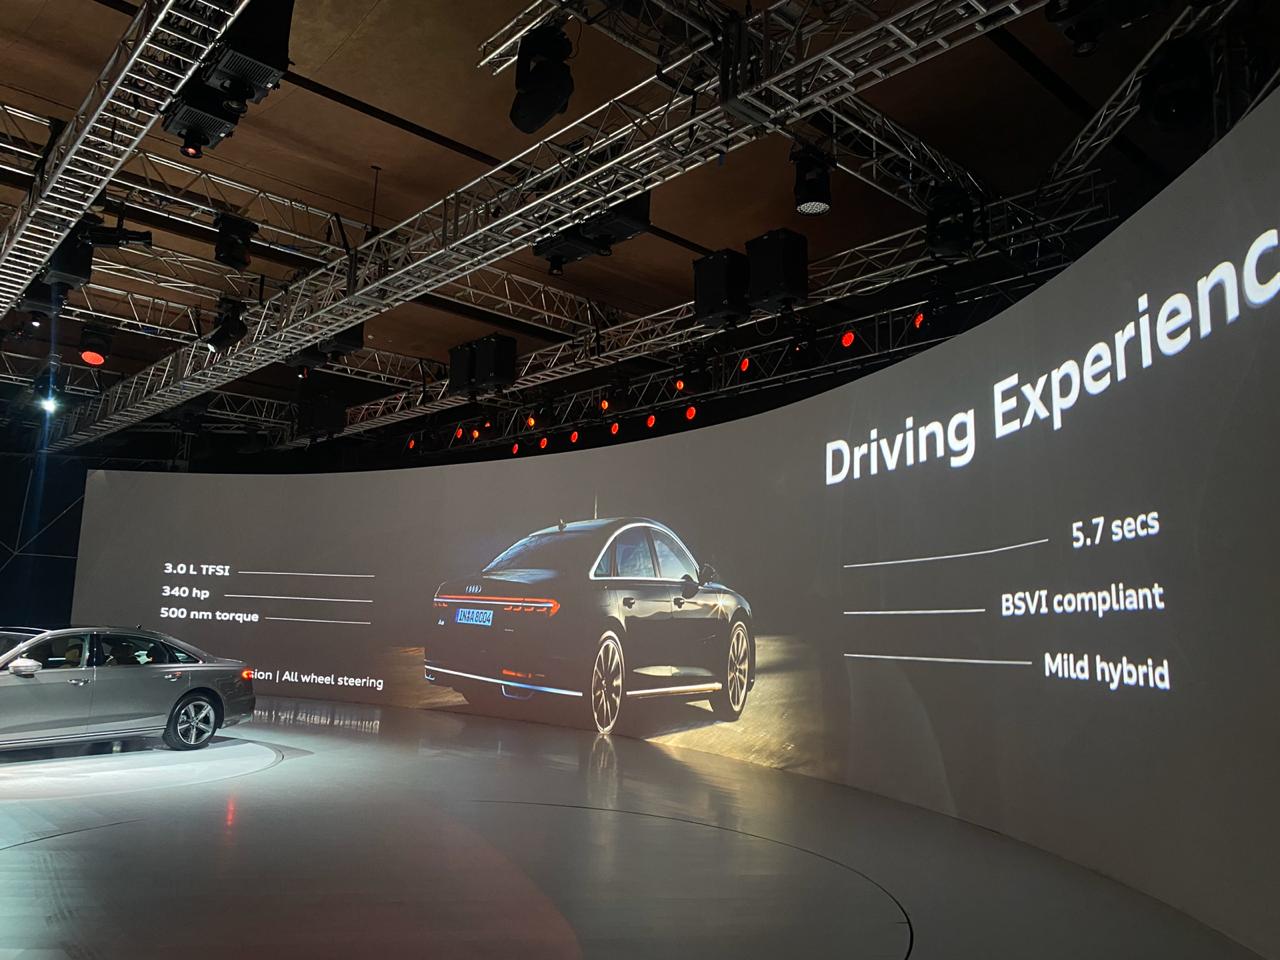 <p>The 3.0l petrol in the India-spec A8 L is BSVI complaint and features mild-hybrid tech.</p>

